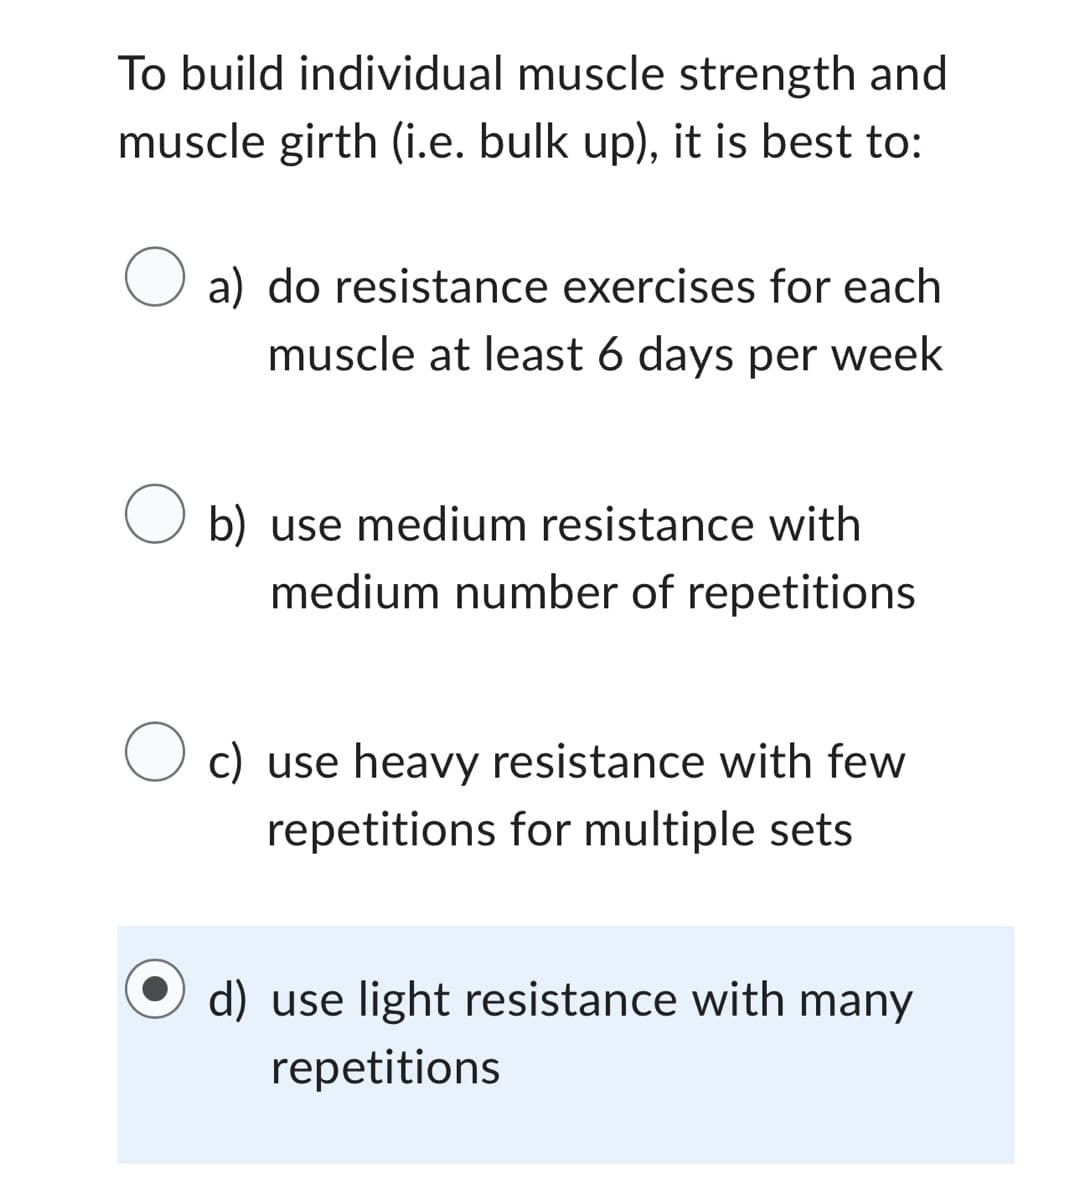 To build individual muscle strength and
muscle girth (i.e. bulk up), it is best to:
O a) do resistance exercises for each
muscle at least 6 days per week
b) use medium resistance with
medium number of repetitions
O c) use heavy resistance with few
repetitions for multiple sets
d) use light resistance with many
repetitions